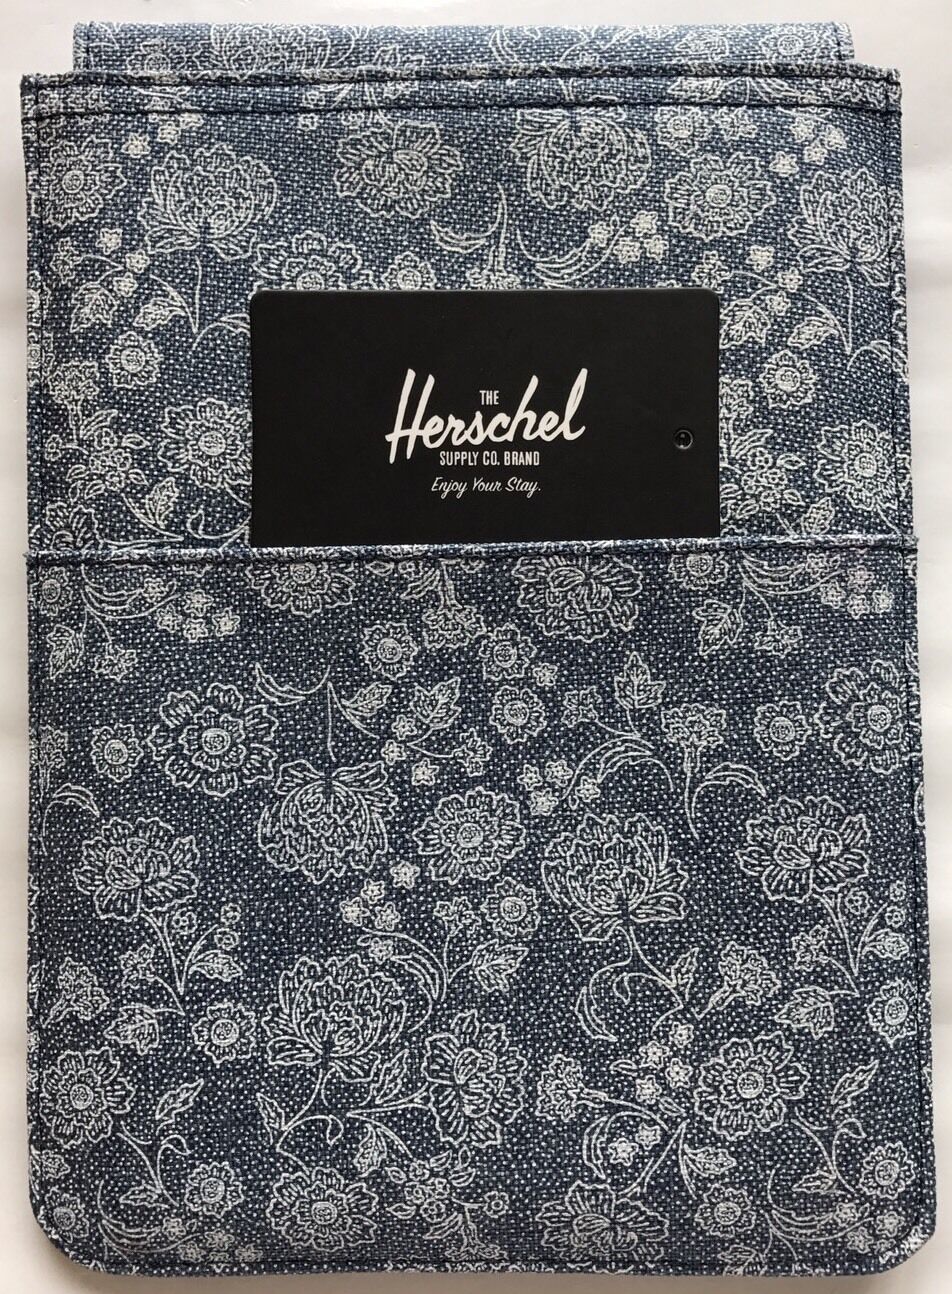 New Herschel Supply Co Spokane Sleeve Pouch For IPad Mini Navy Floral  Print